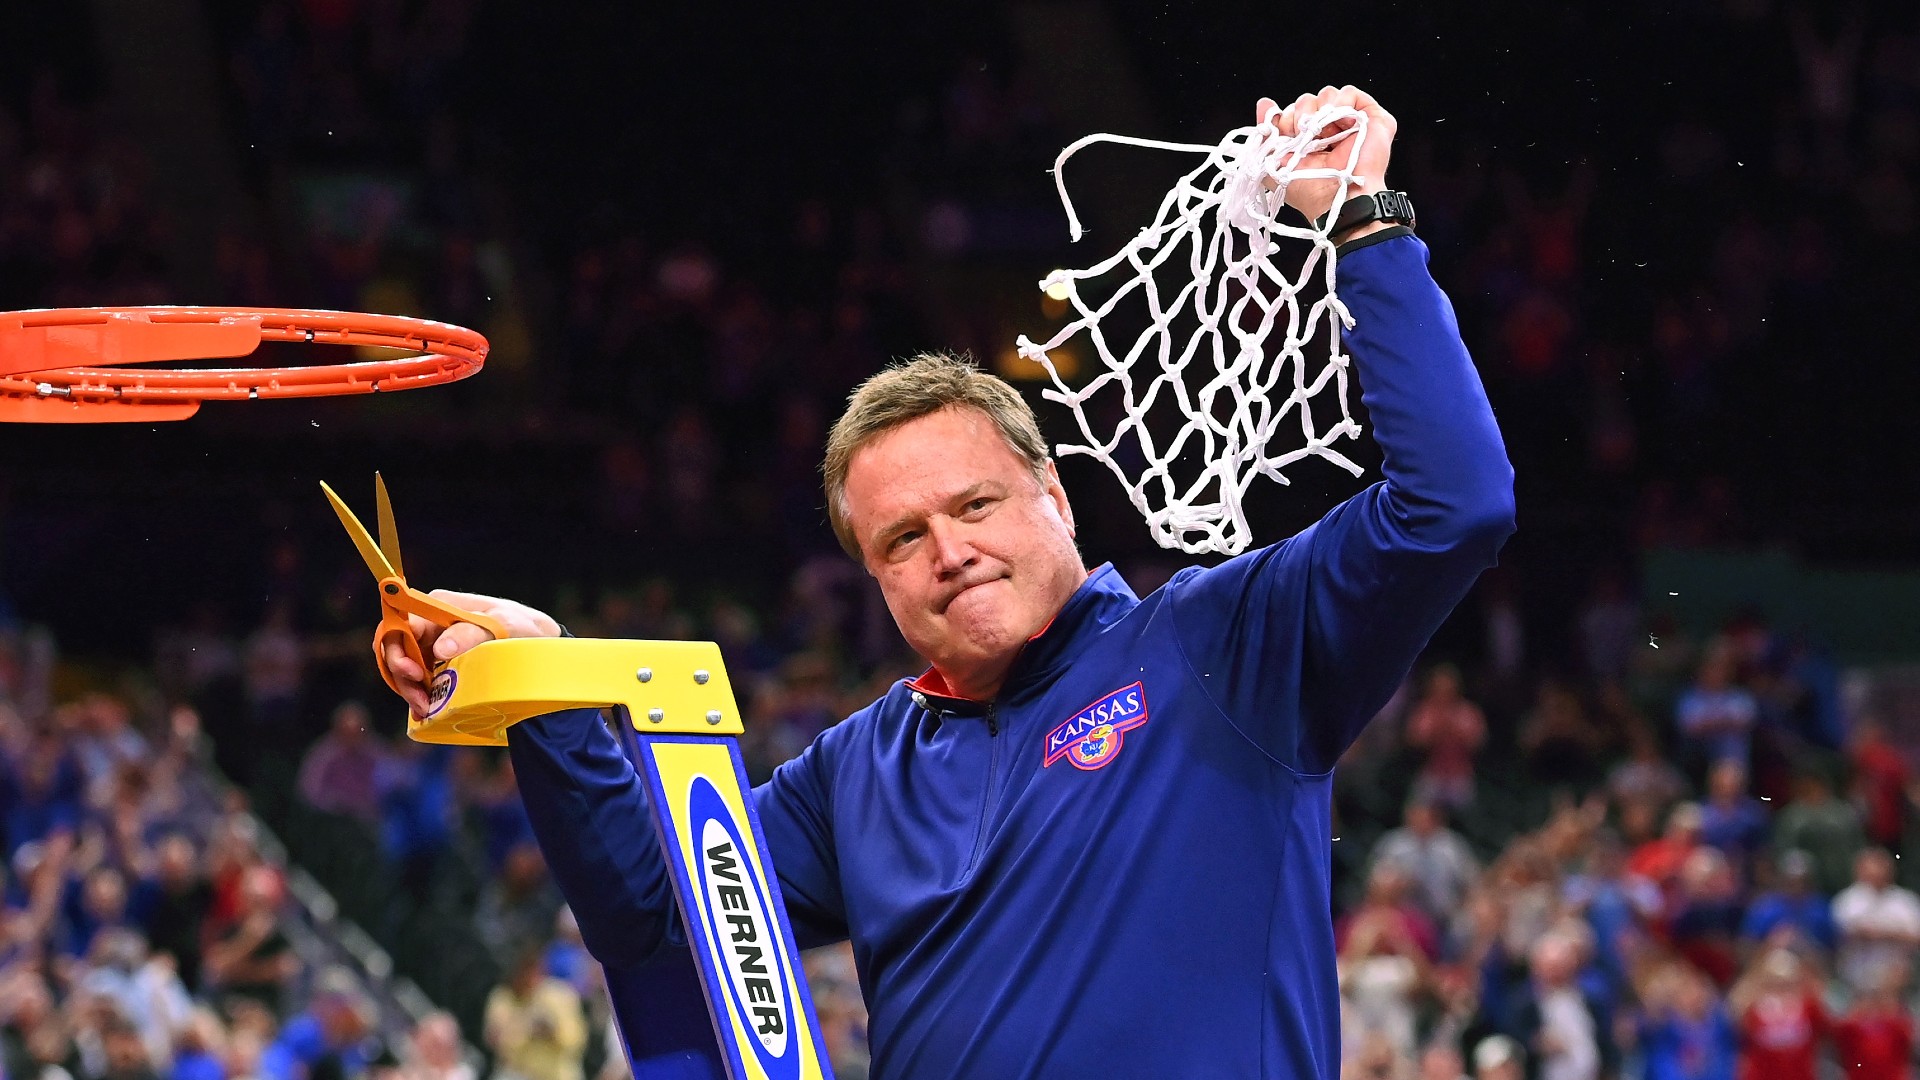 March Madness 2022: No. 1 seed Kansas survives shorthanded